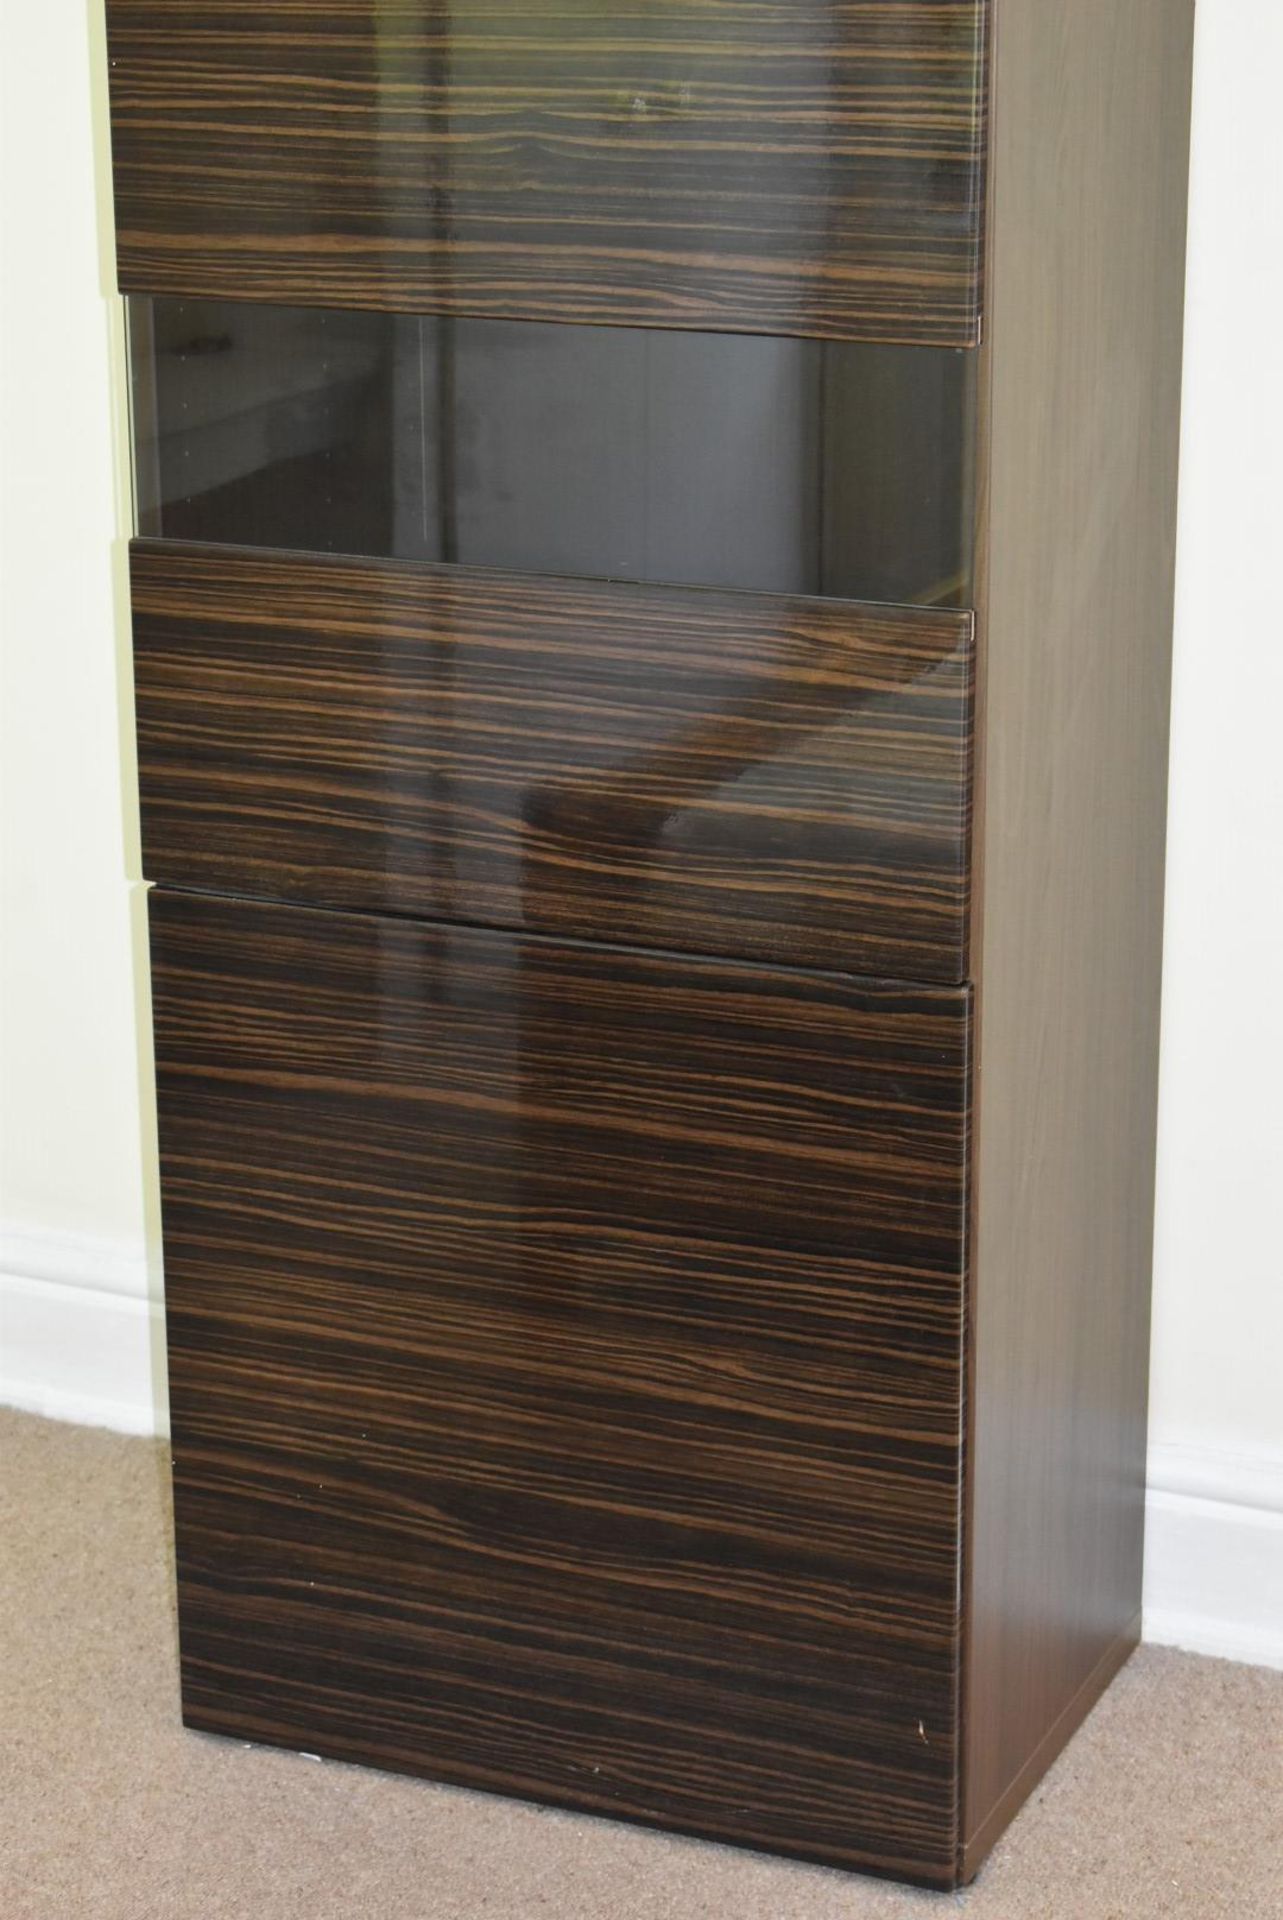 1 x Upright Storage Cabinet With Zebrano Wood Doors - No VAT On The Hammer - CL999 - Location: - Image 2 of 6